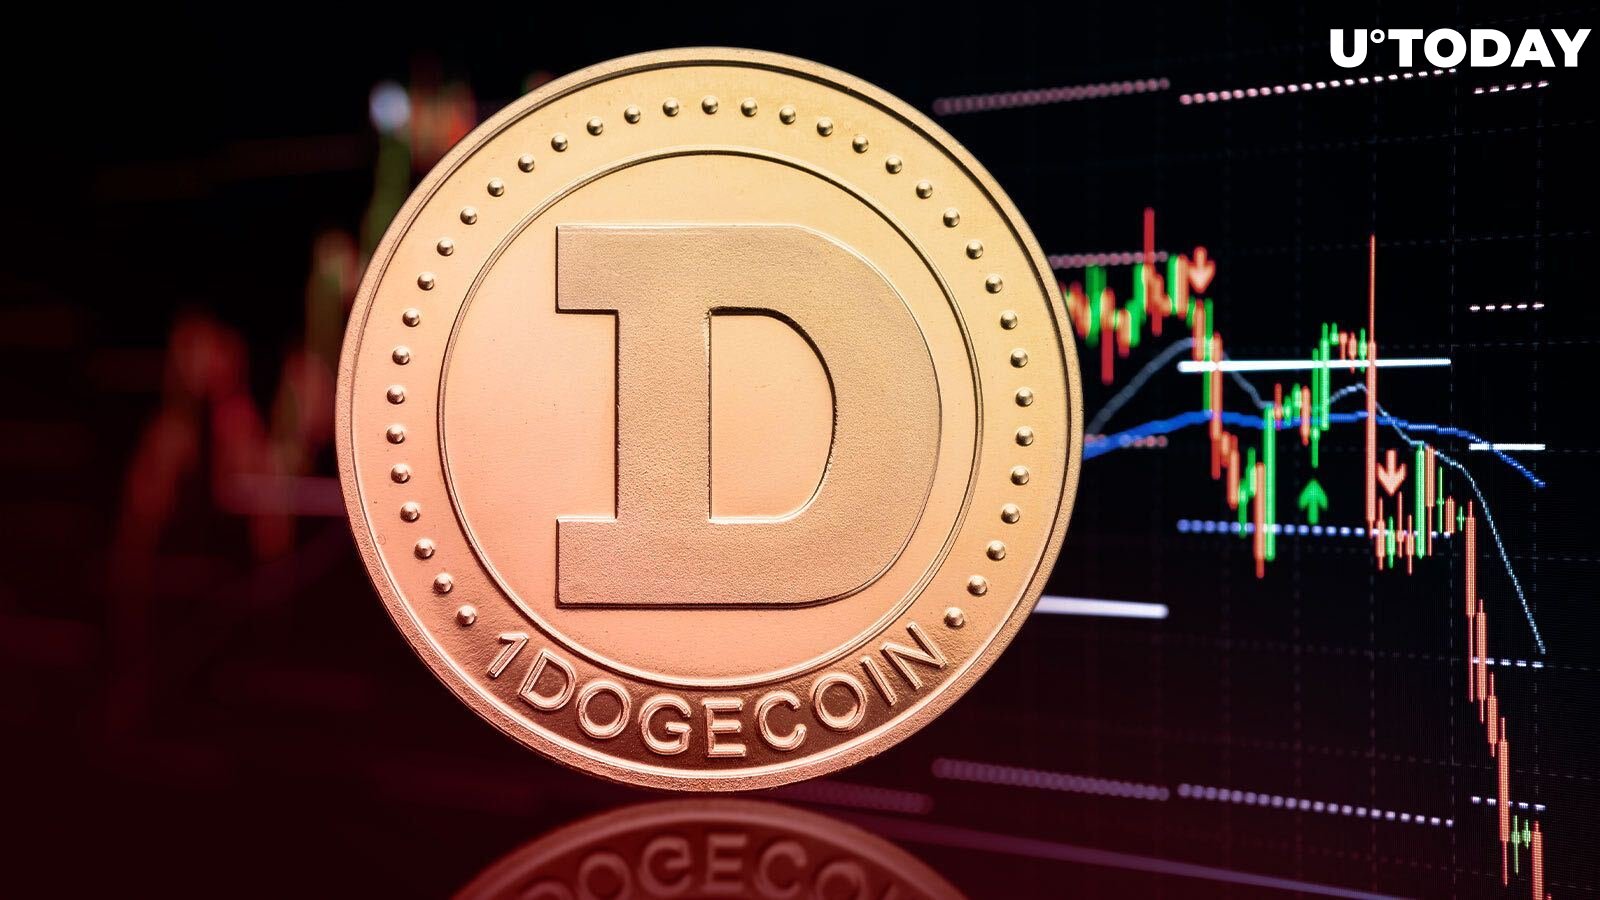 Dogecoin (DOGE) Pump Once Again Indicates Collapse of Crypto Market